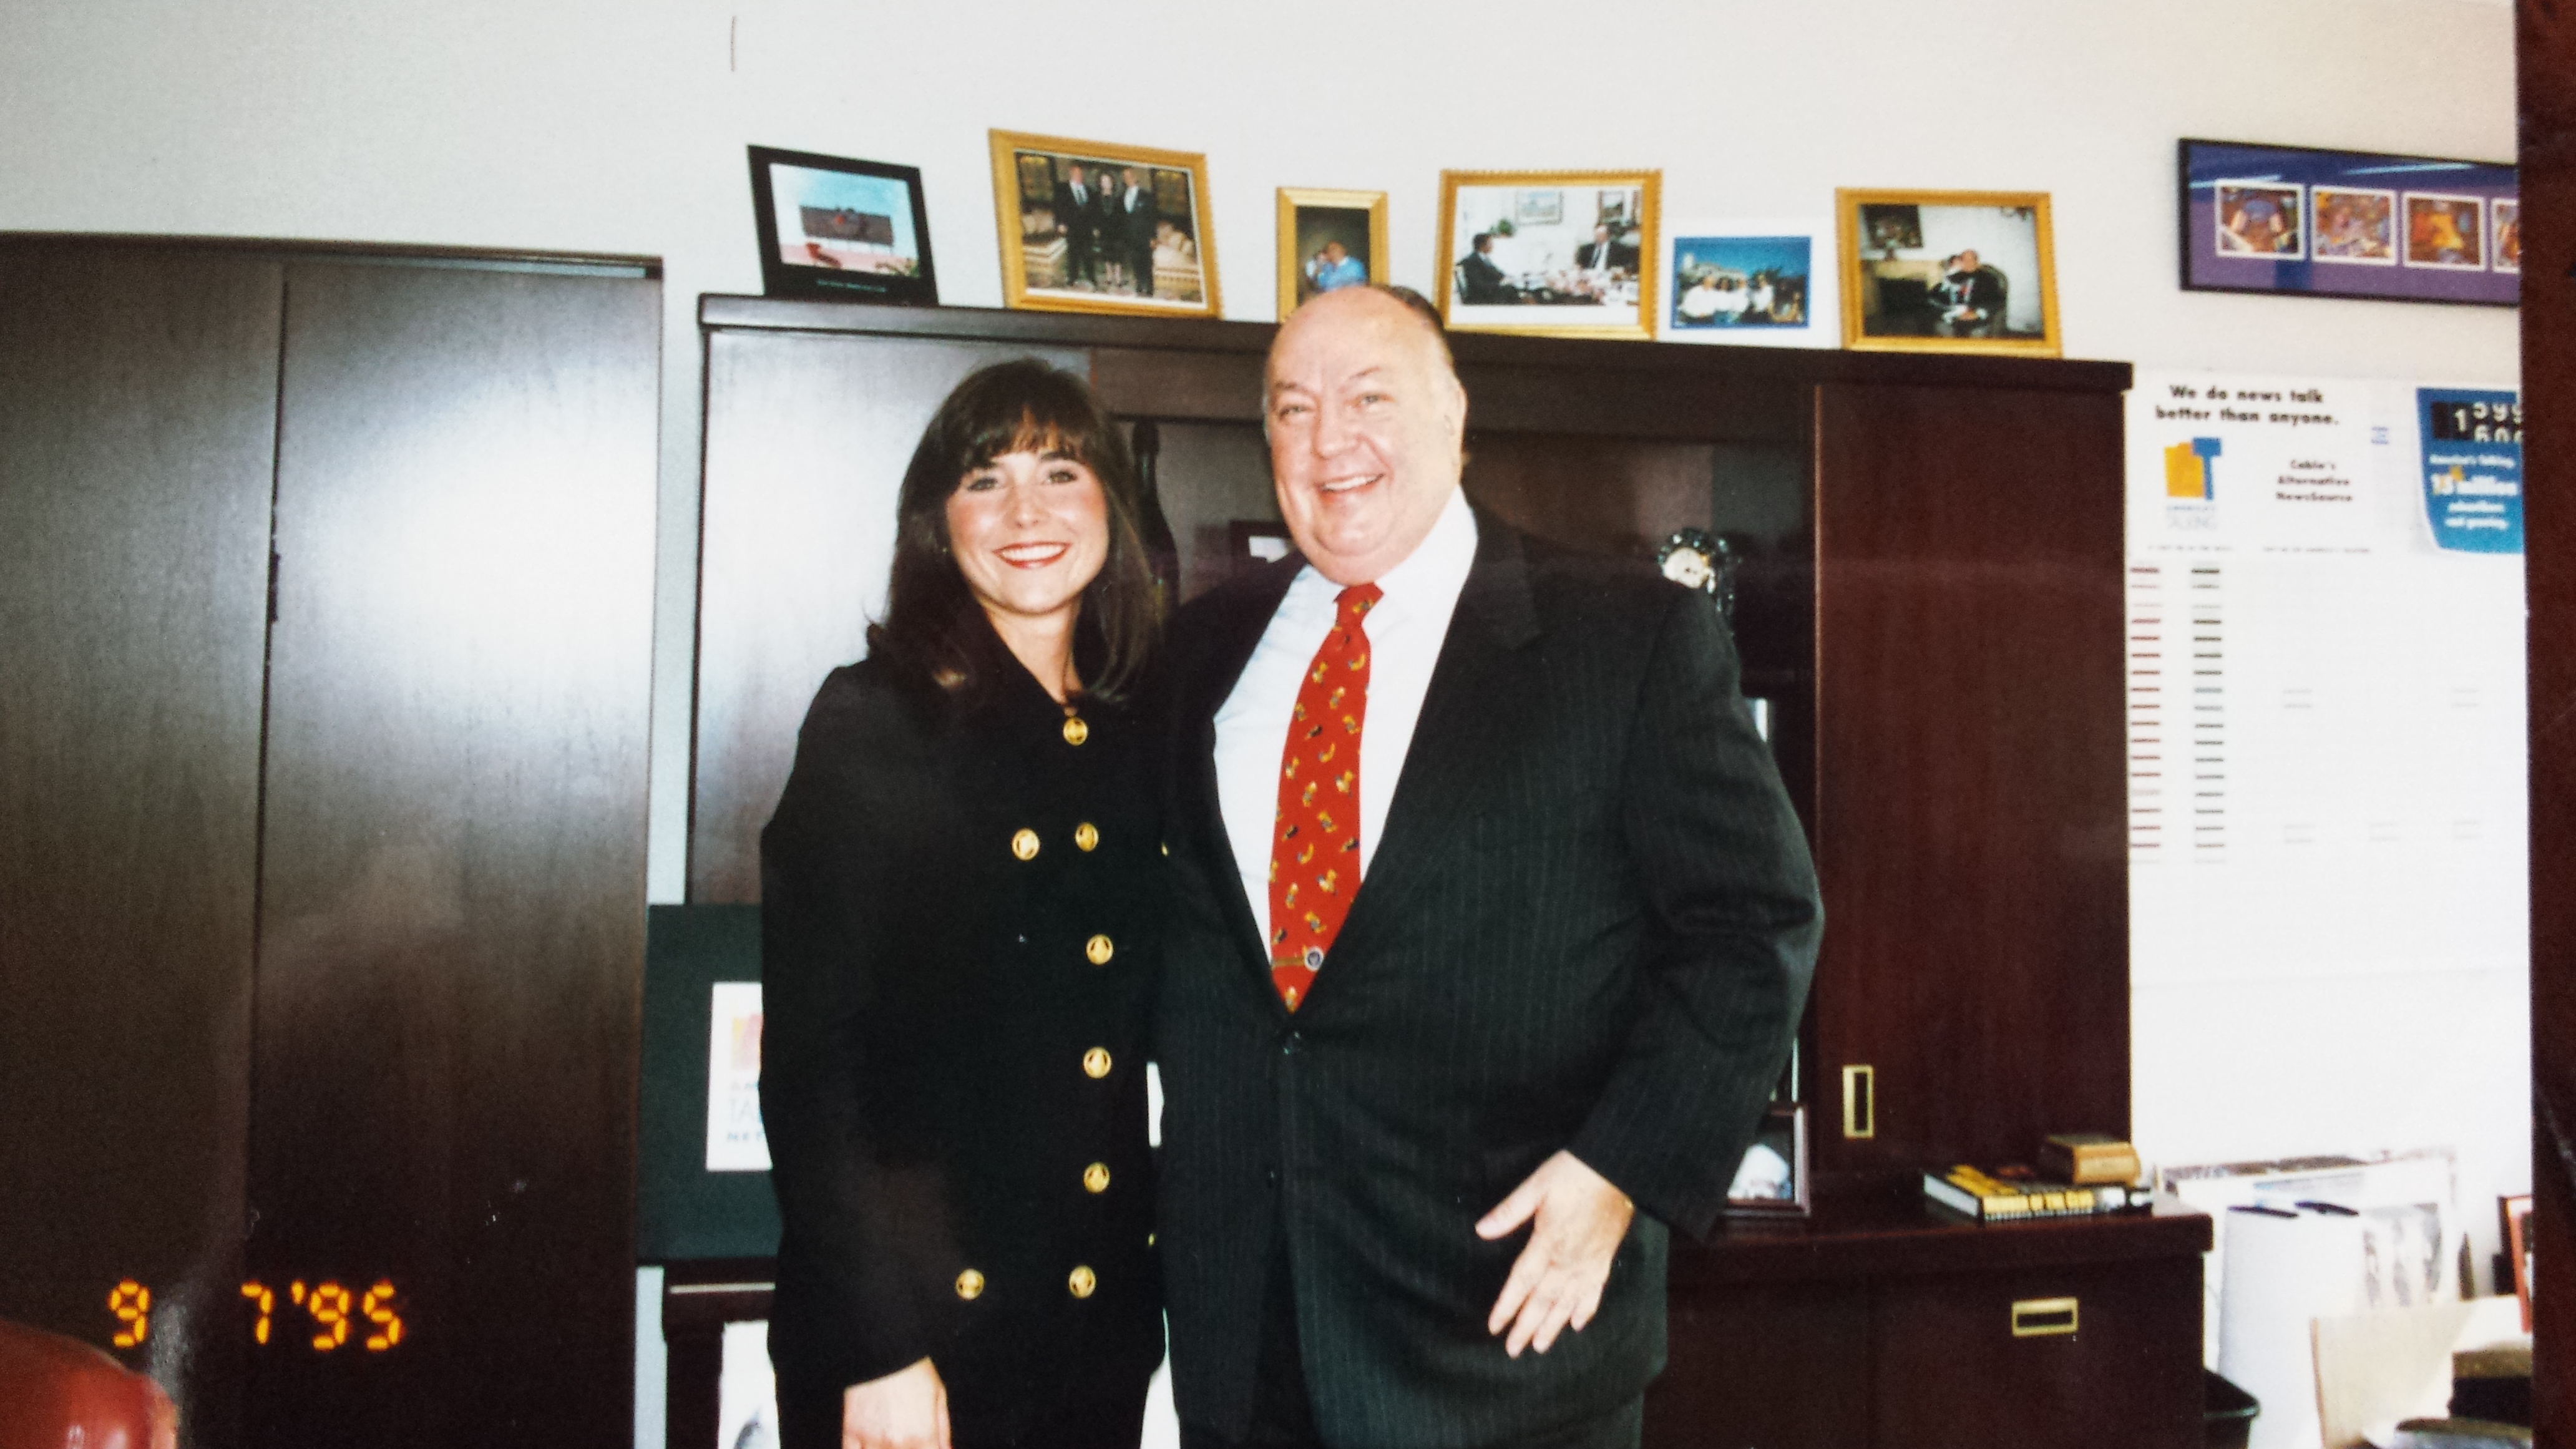 Roger Ailes wishes Heather well as she departs CNBC for her first on-air job (1995)